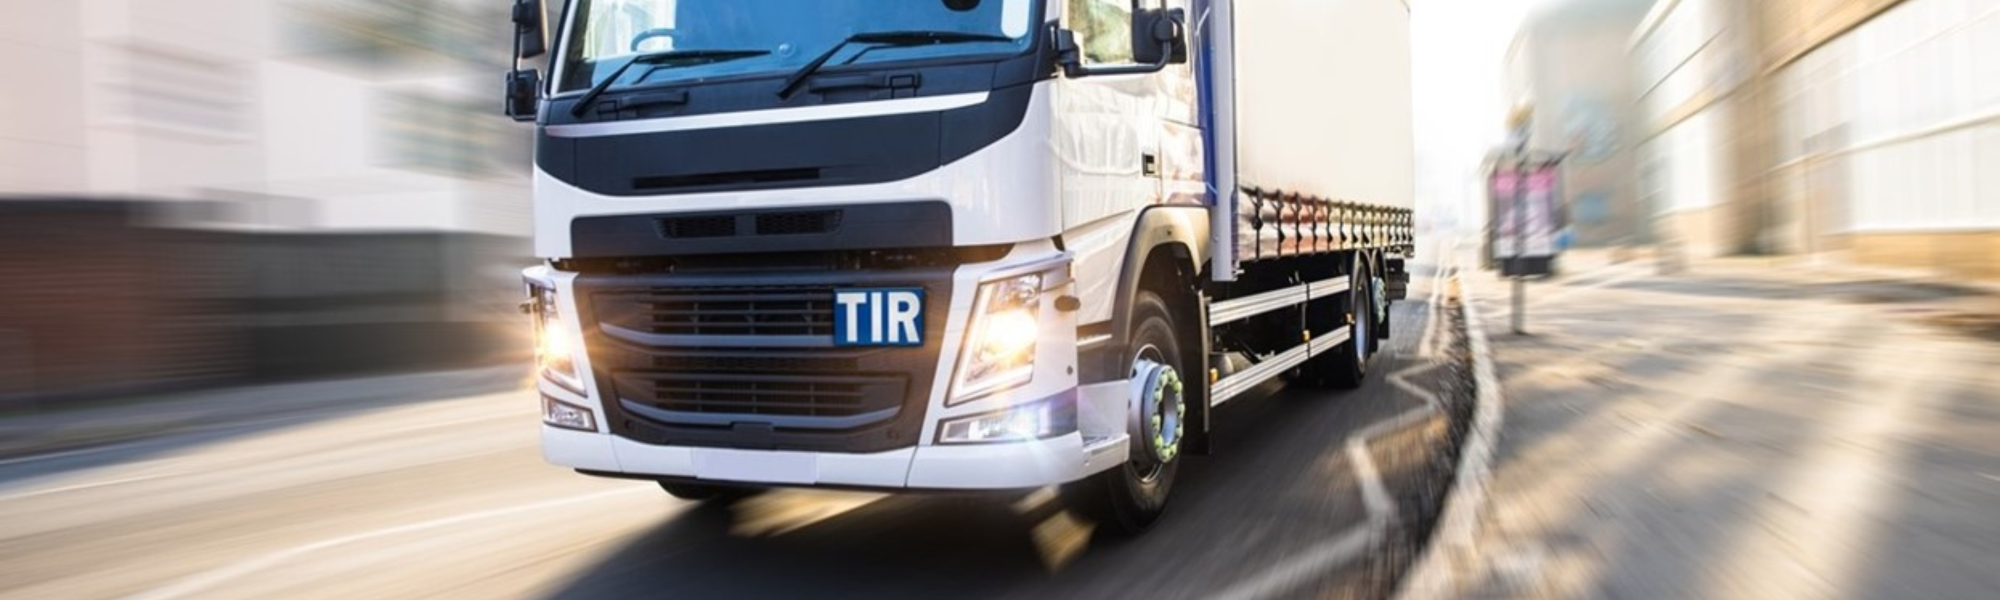 Faster trade across GCC borders: Using TIR to boost agility and profit 